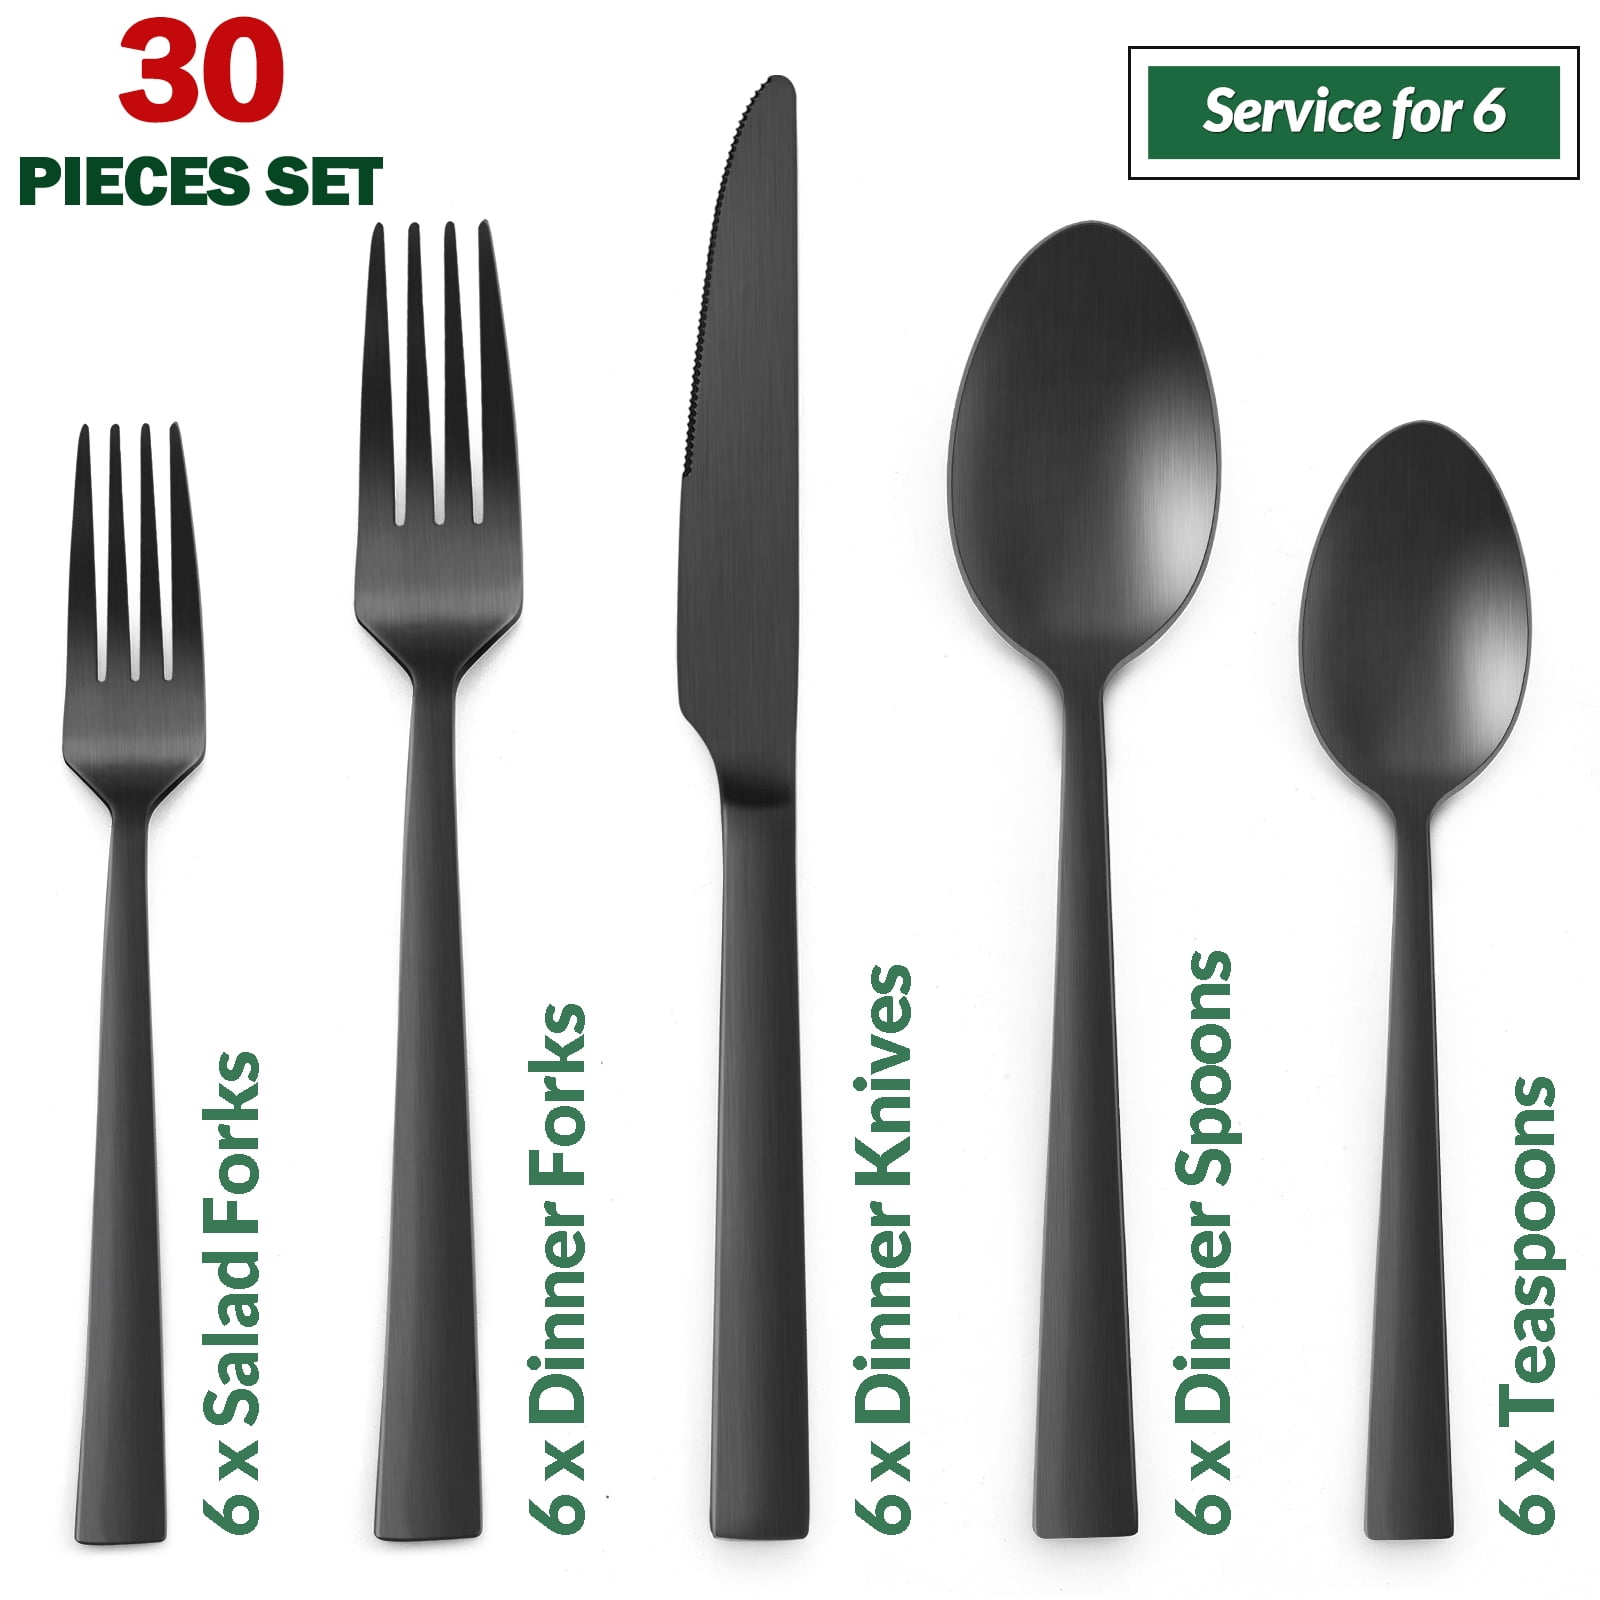 KINGSTONE Black Silverware Set, 20 PCs Black Flatware Set for 4, 18/10  Stainless steel Cutlery Set for Home Kitchen and Restaurant(Black, 20  pieces